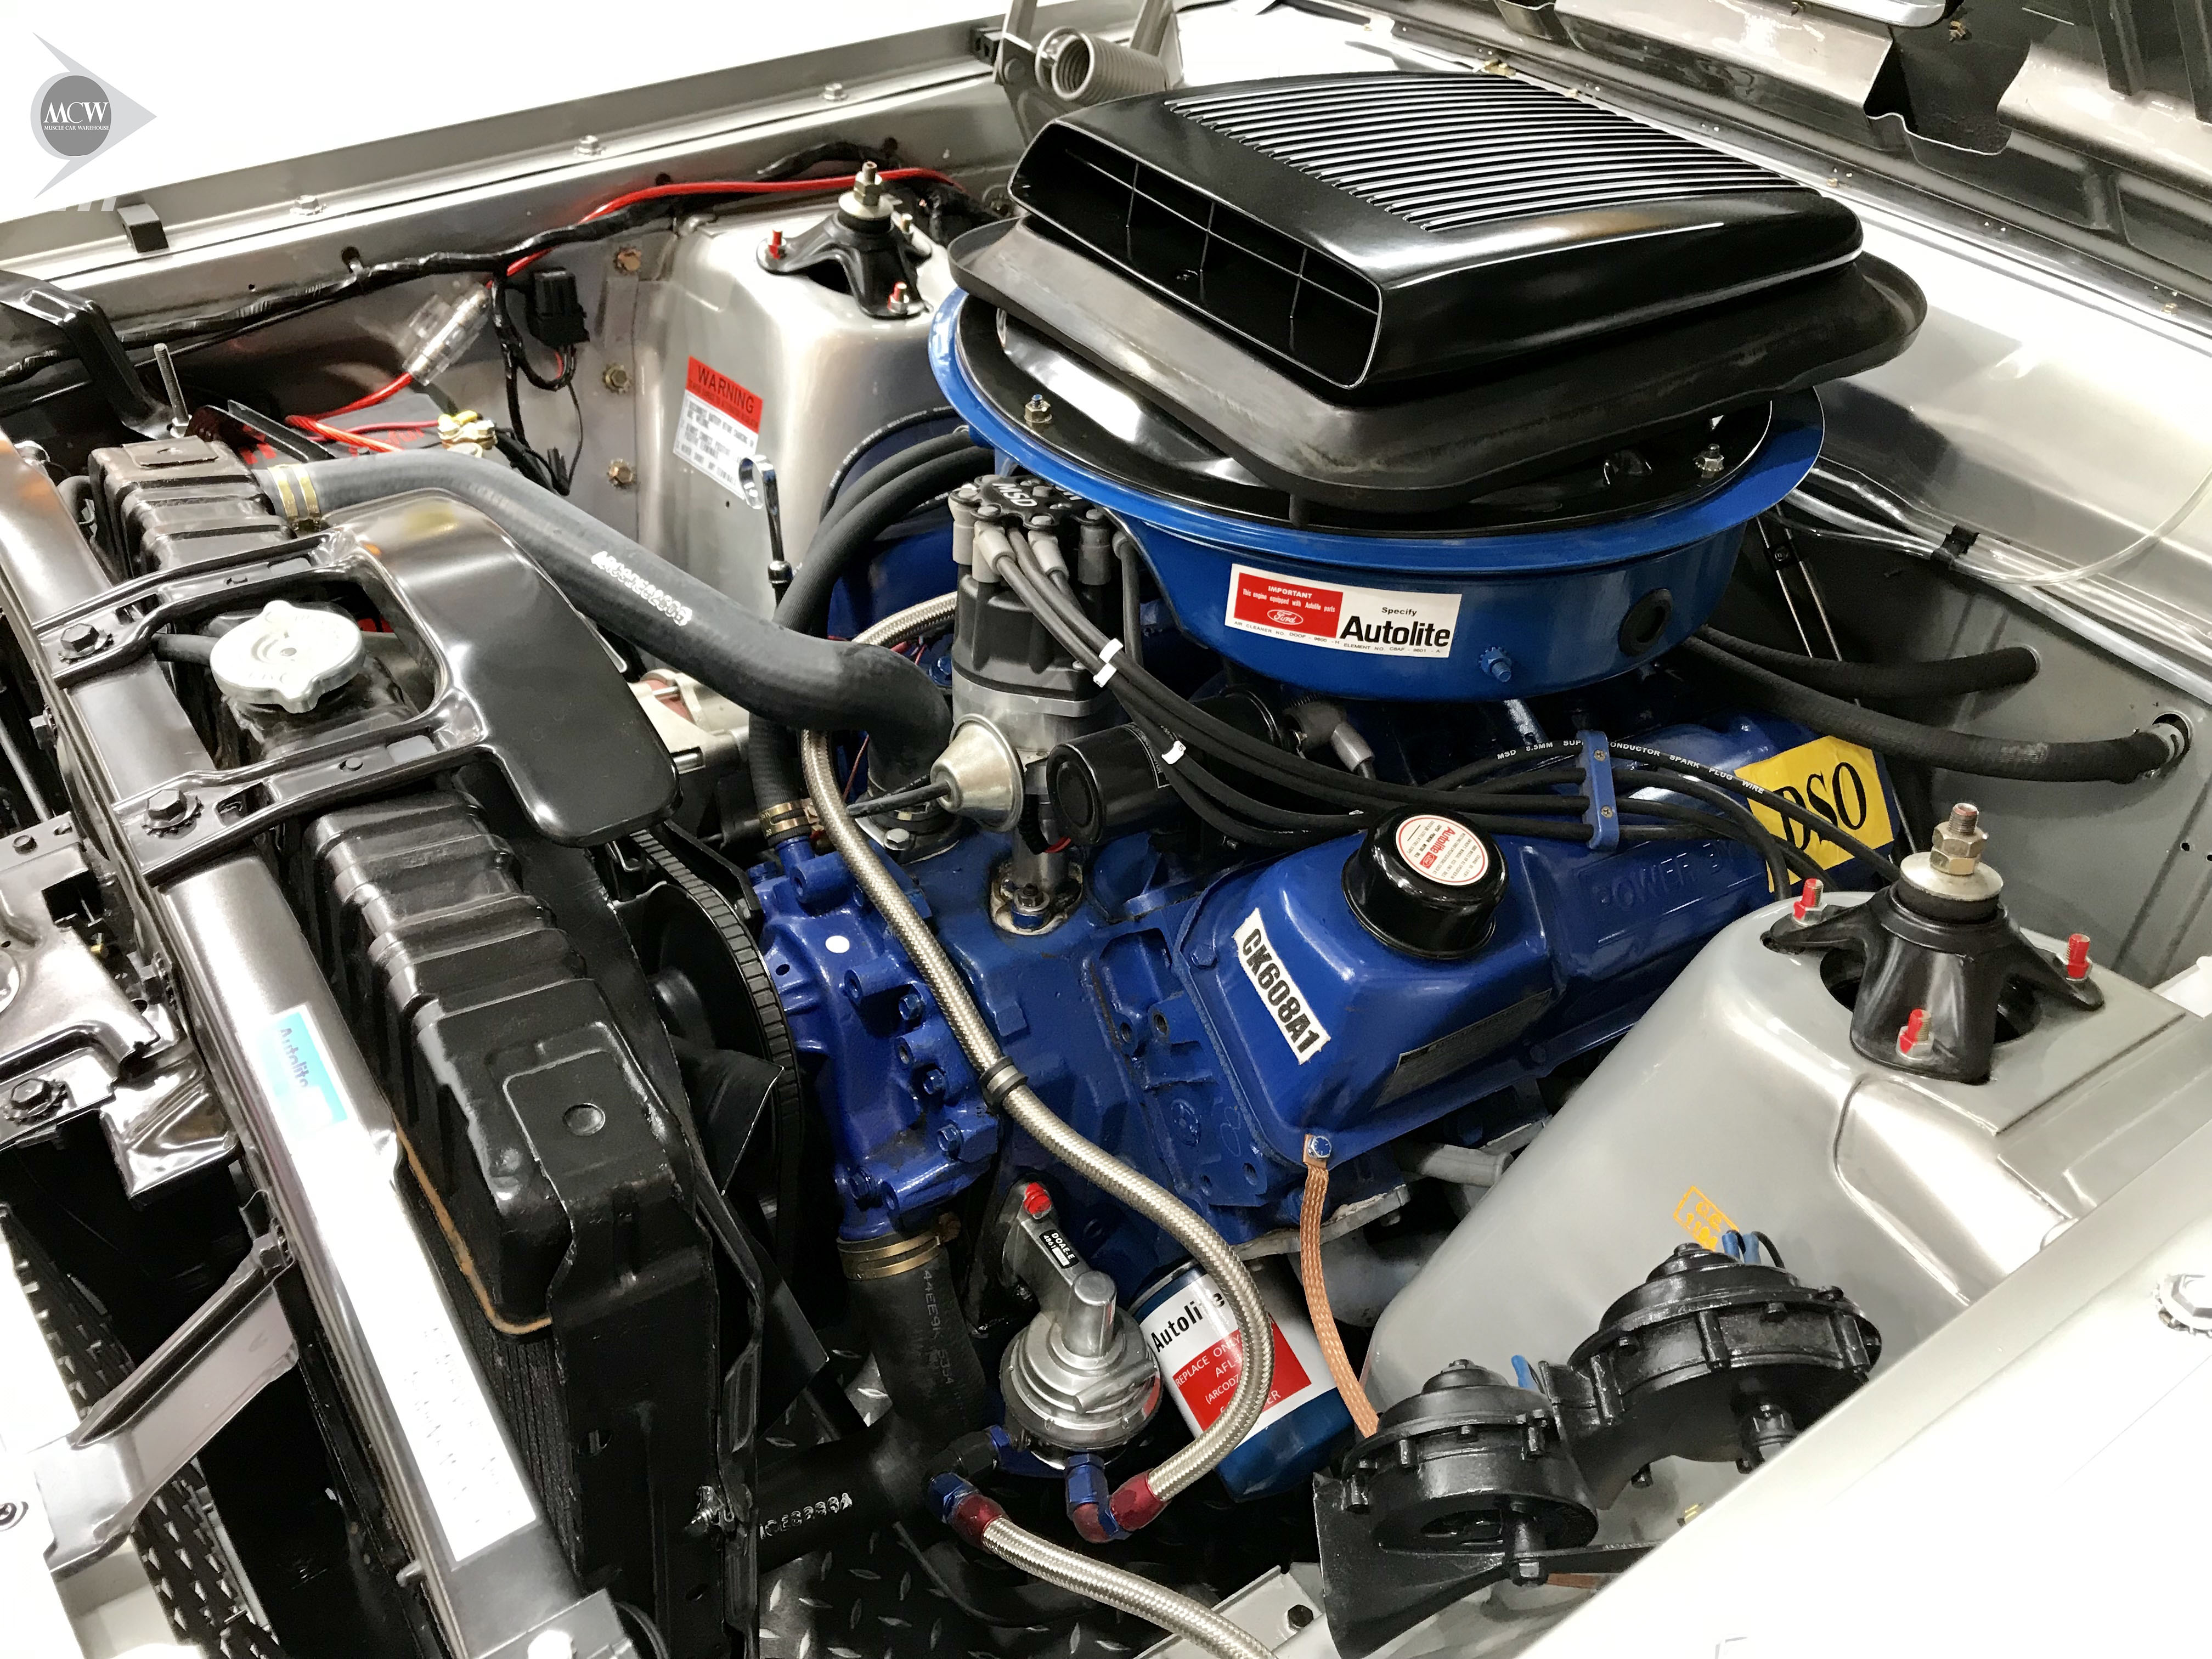 Ford Falcon XY GT Replica Engine | Muscle Car Warehouse